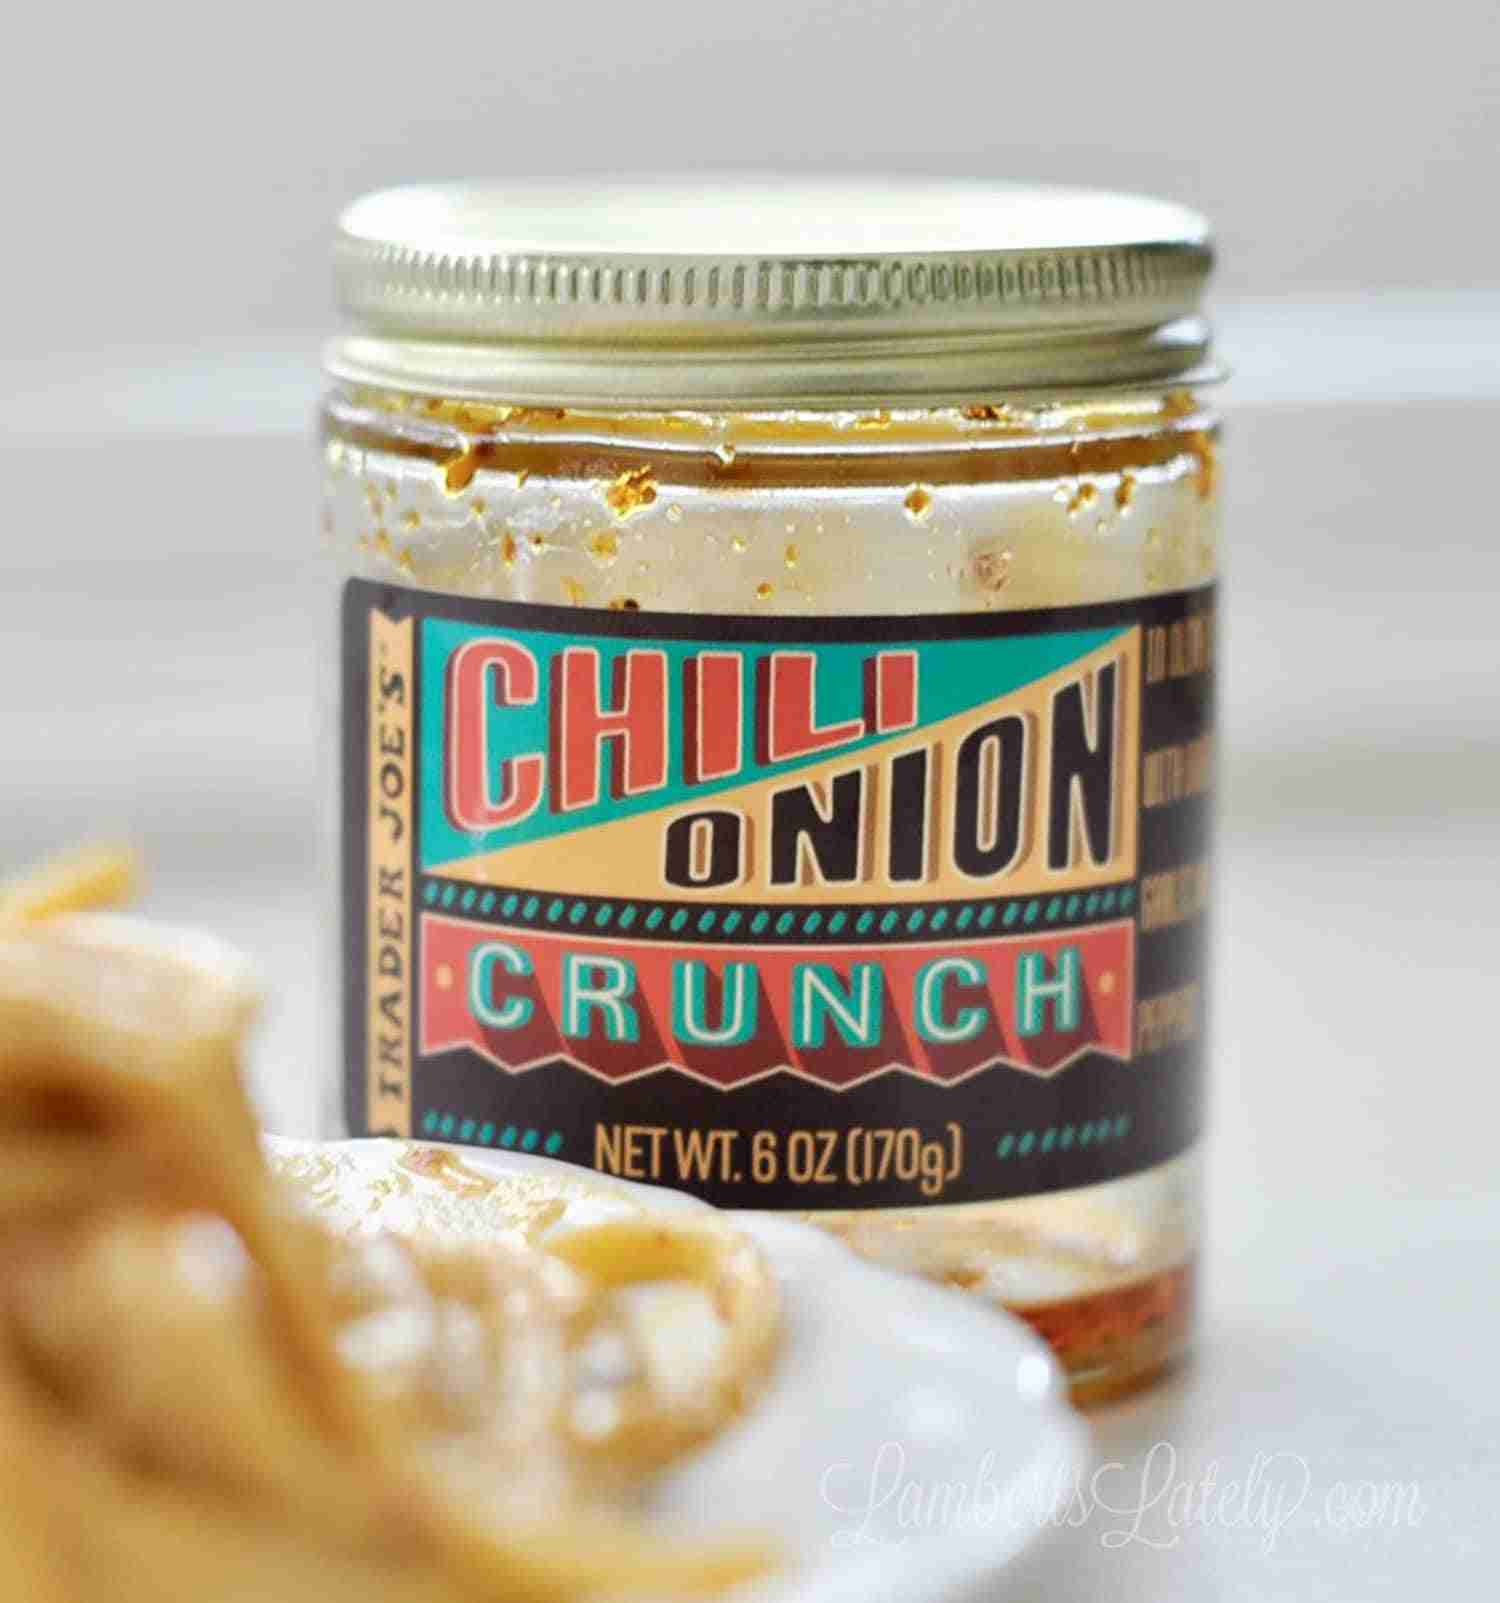 Chili Onion Crunch Chicken Pasta uses the popular Trader Joe's sauce to make a spicy, creamy noodle dish in just minutes with an Instant Pot! One of the best uses for this condiment is in pasta recipes - try it with shrimp or other seafoods for a fun twist.